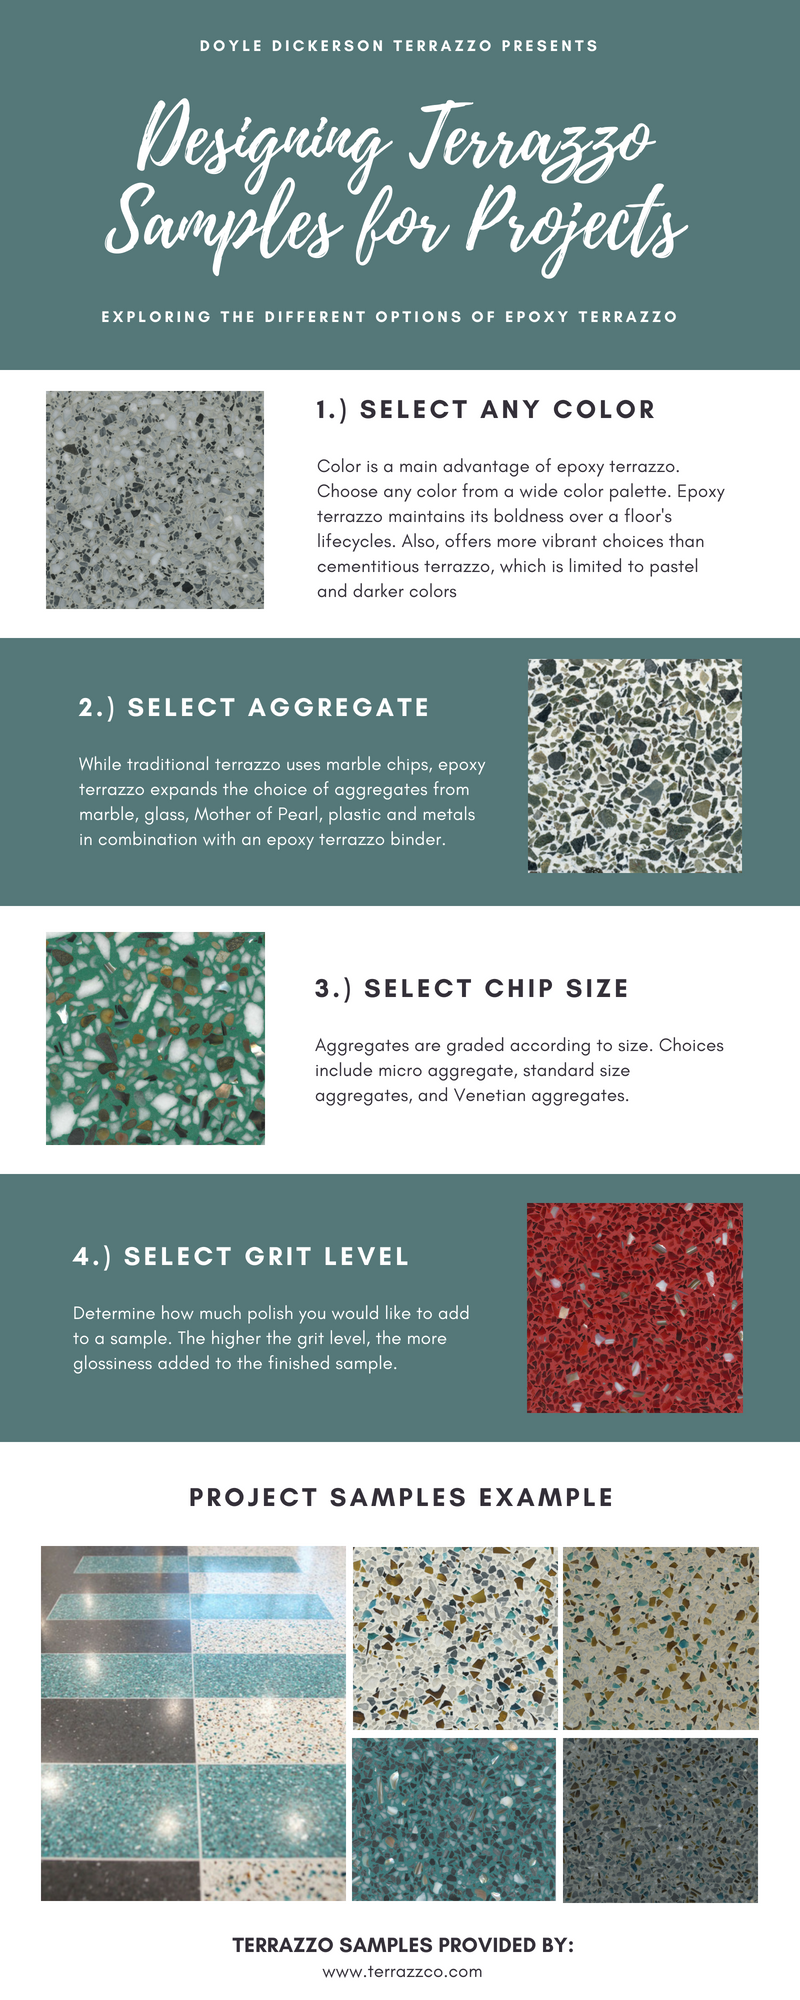 Designing Terrazzo Samples for Projects